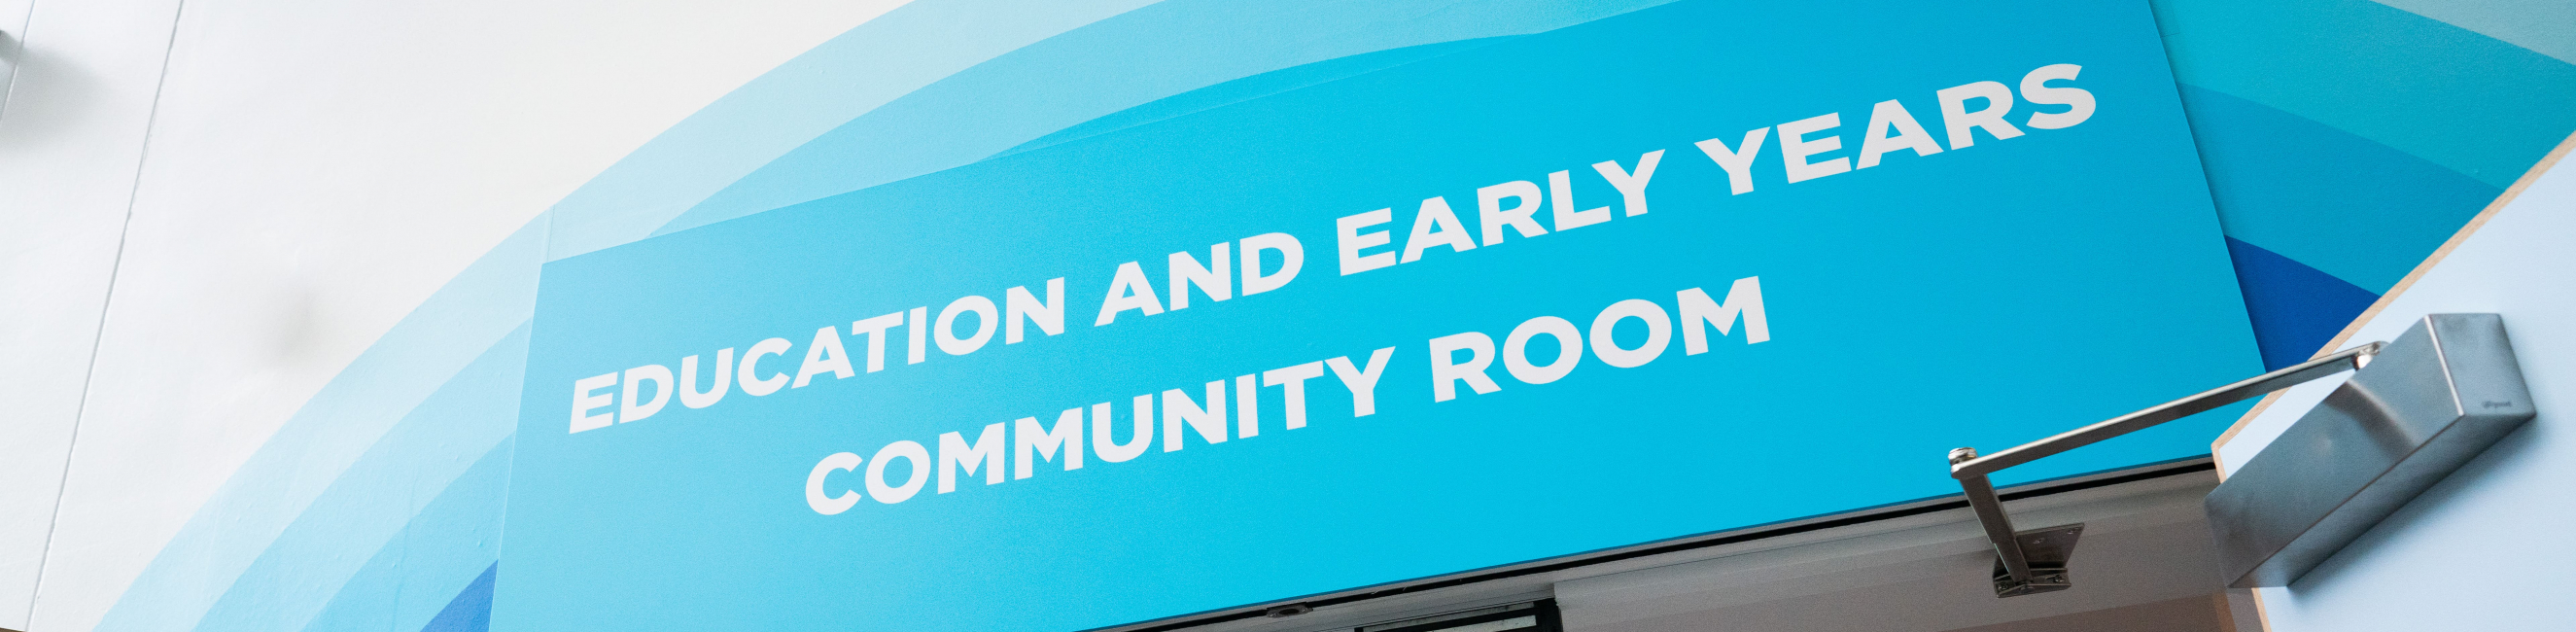 early years community room sign